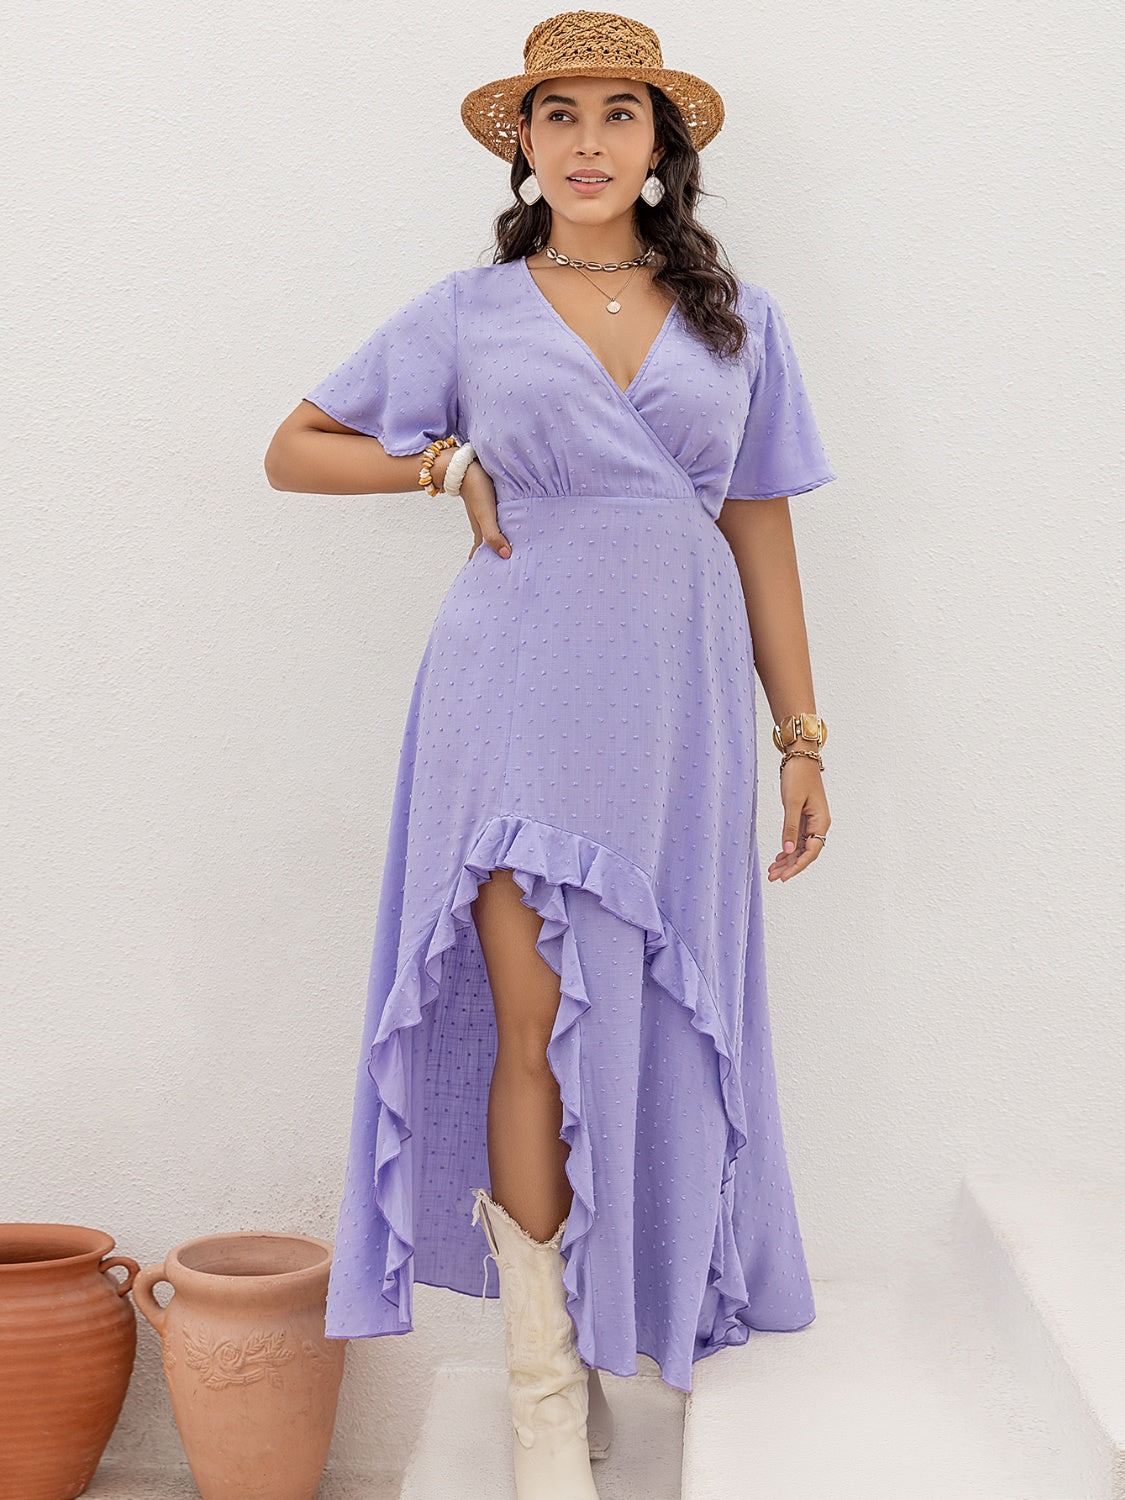 Elegant Plus Size Beach Wedding Guest Dress - Swiss Dot High-Low Surplice Style for Perfect Summer Celebrations